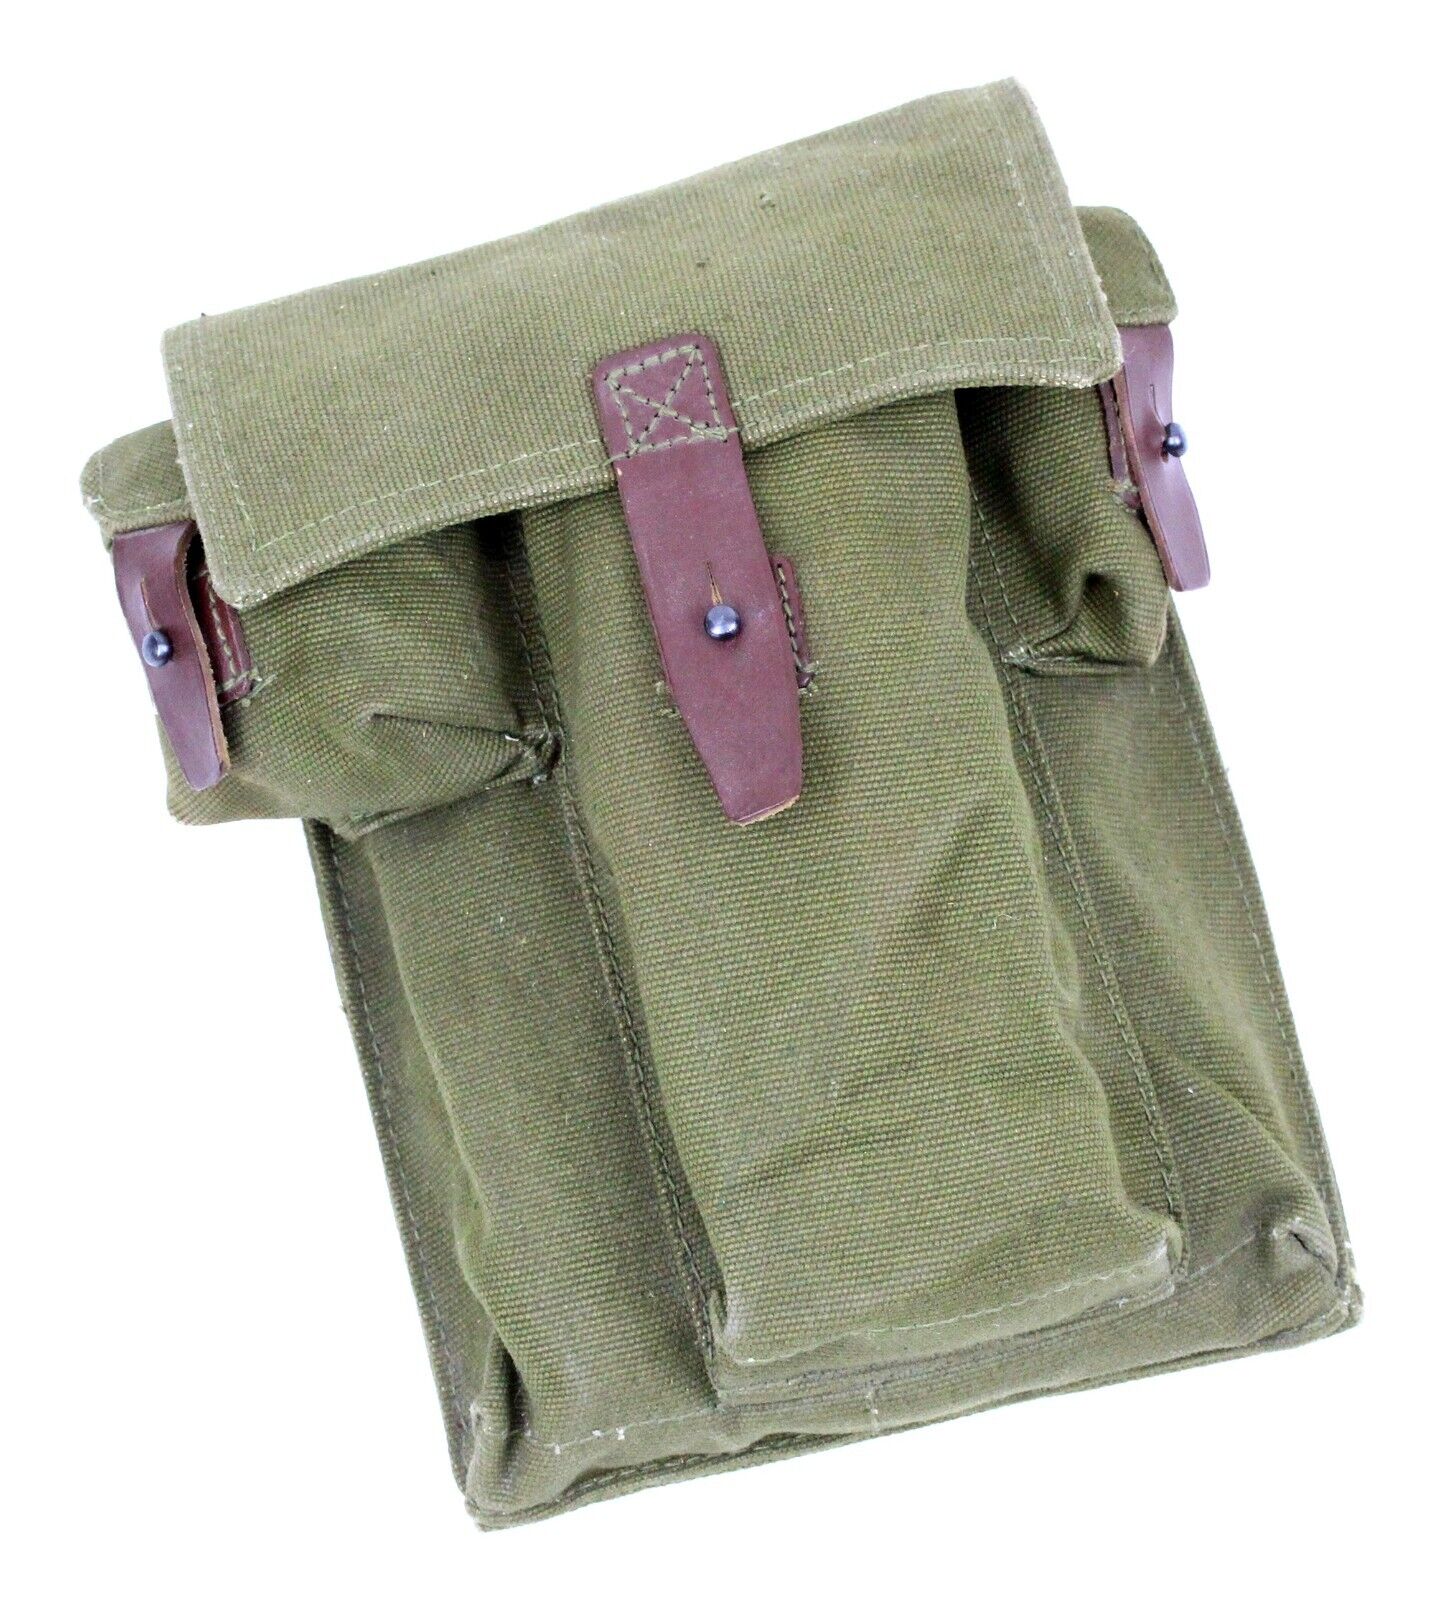 Romanian Military Surplus 3-Cell Magazine Pouch in Excellent Unissued Condition